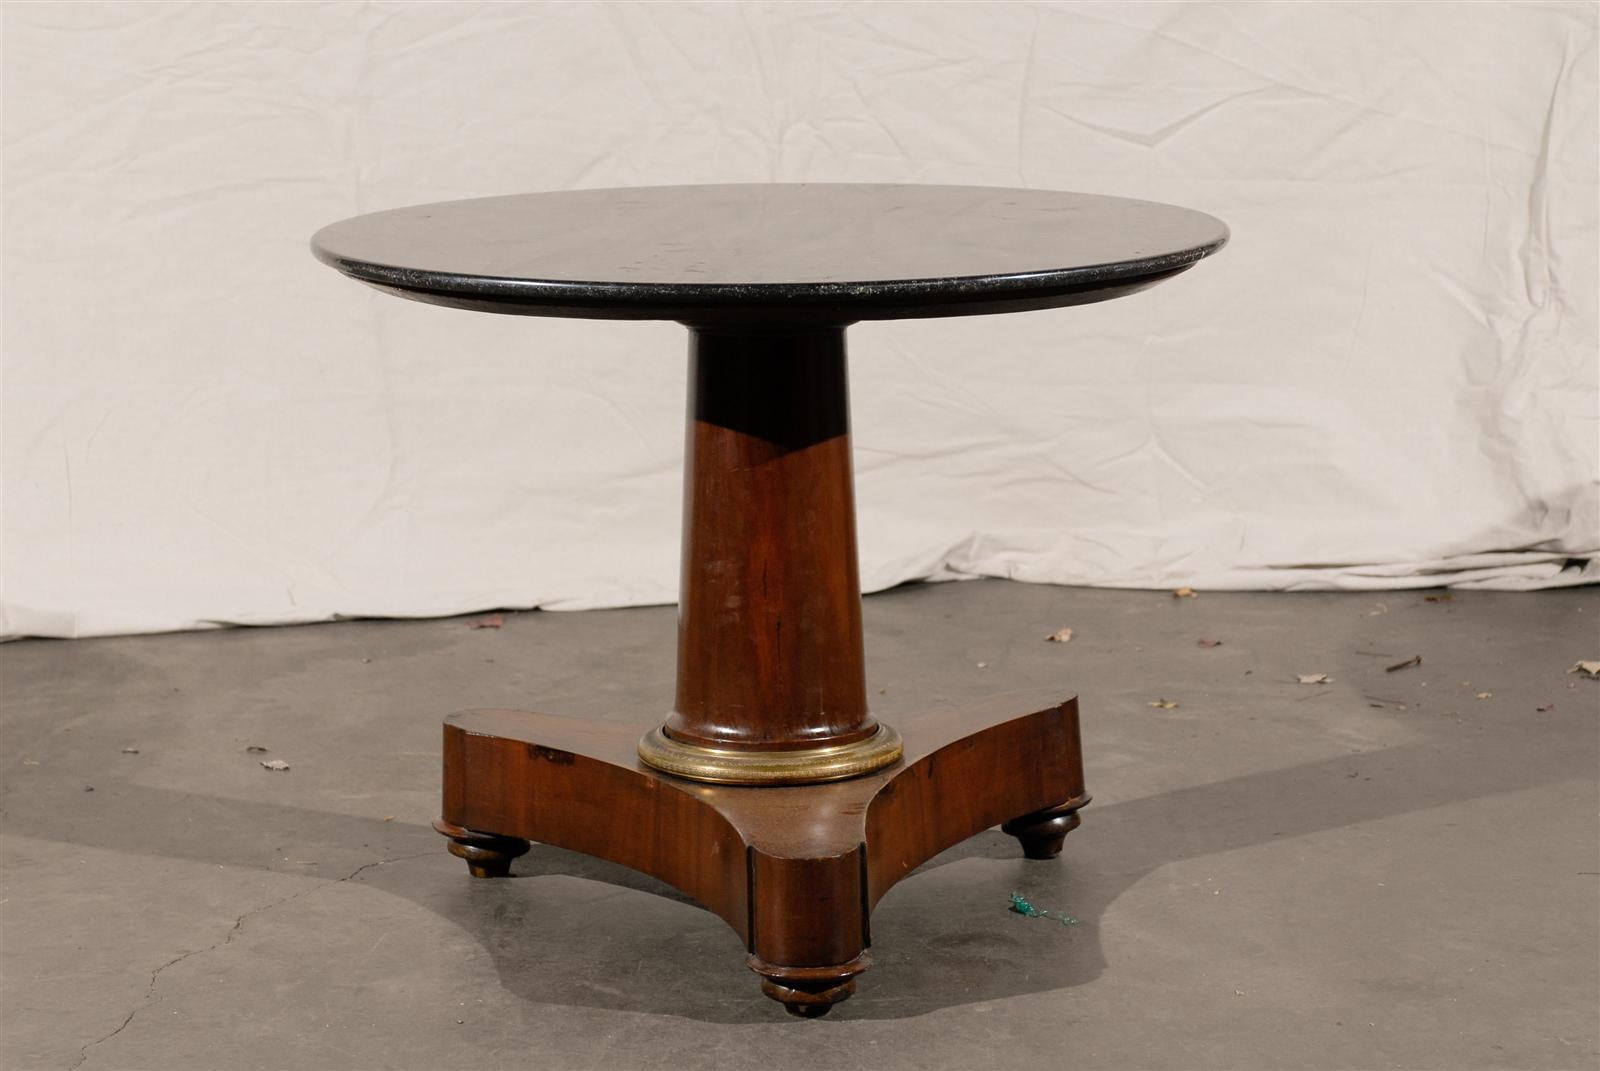 19th century French empire marble-top center table with single column gilt bronze mount.